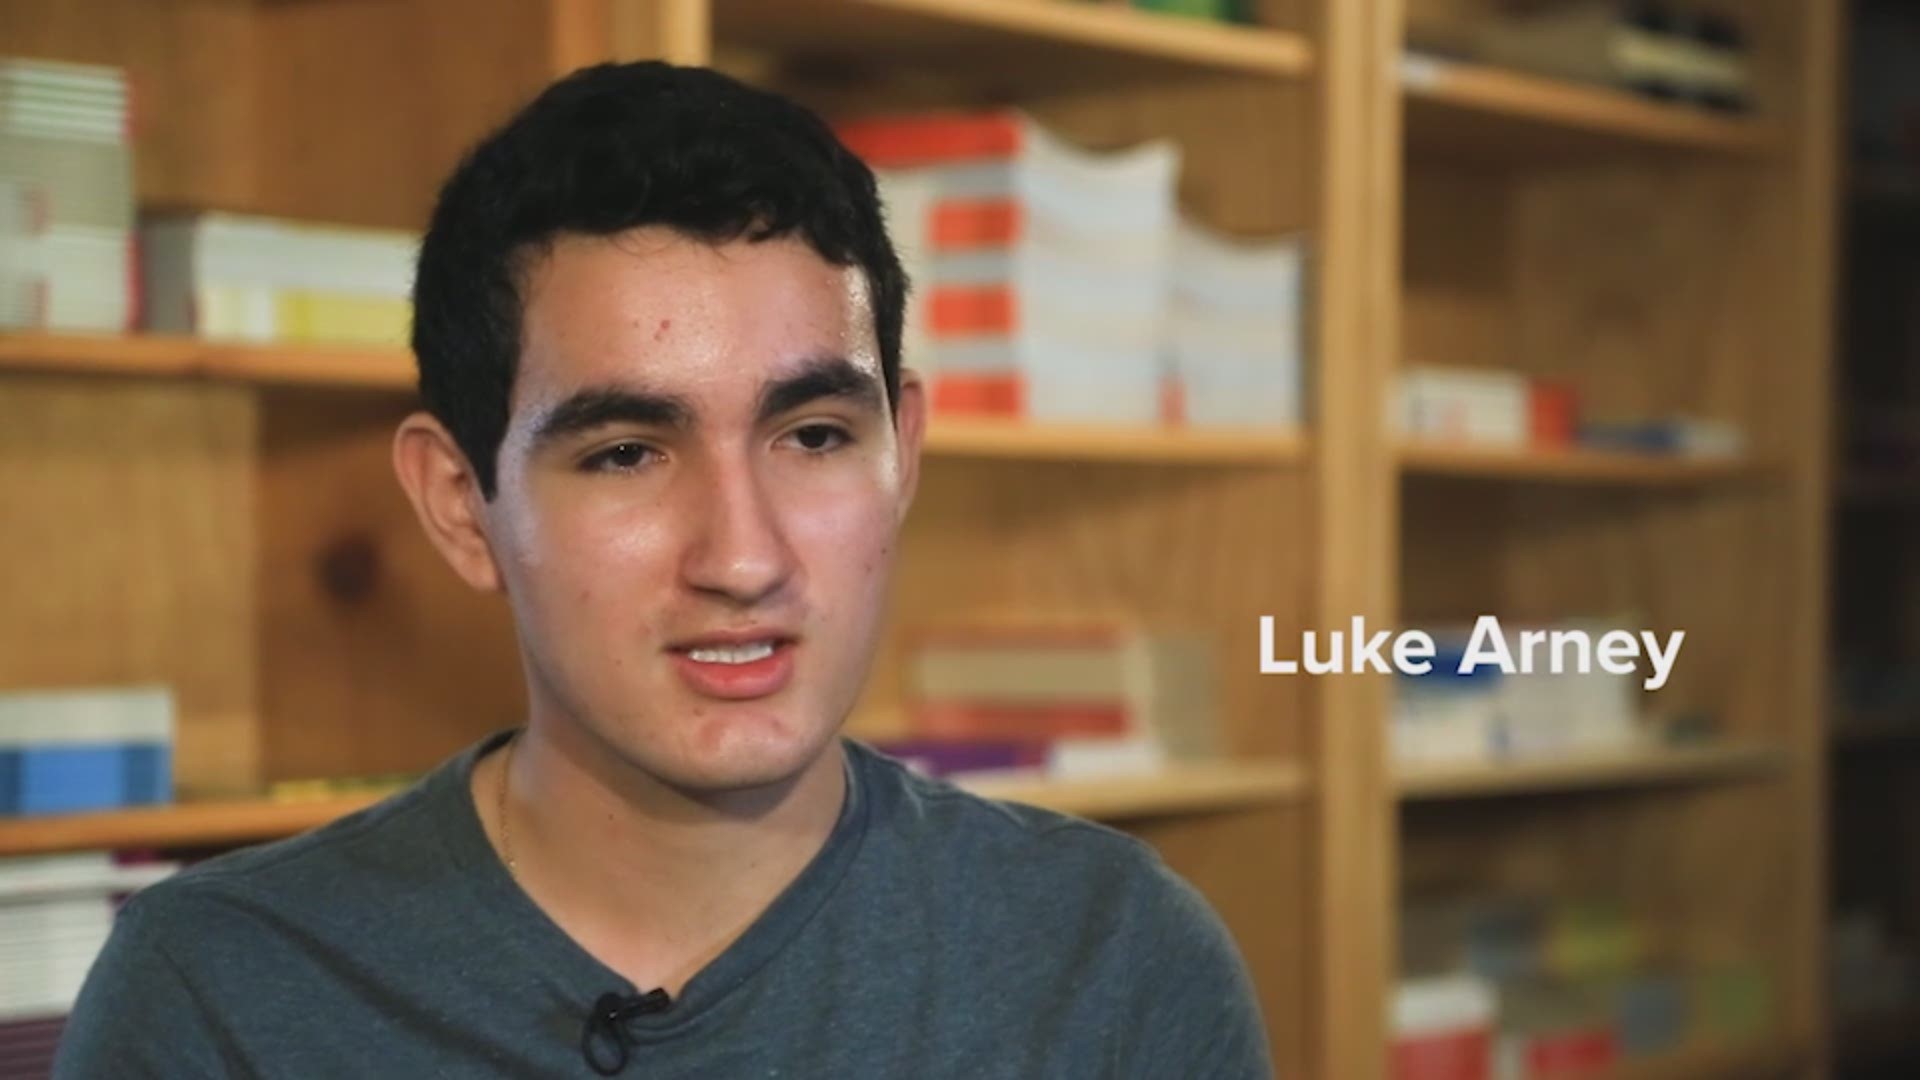 Luke Arney volunteers at Book Spring, a non-profit that aims to close the early literacy gap in Central Texas.